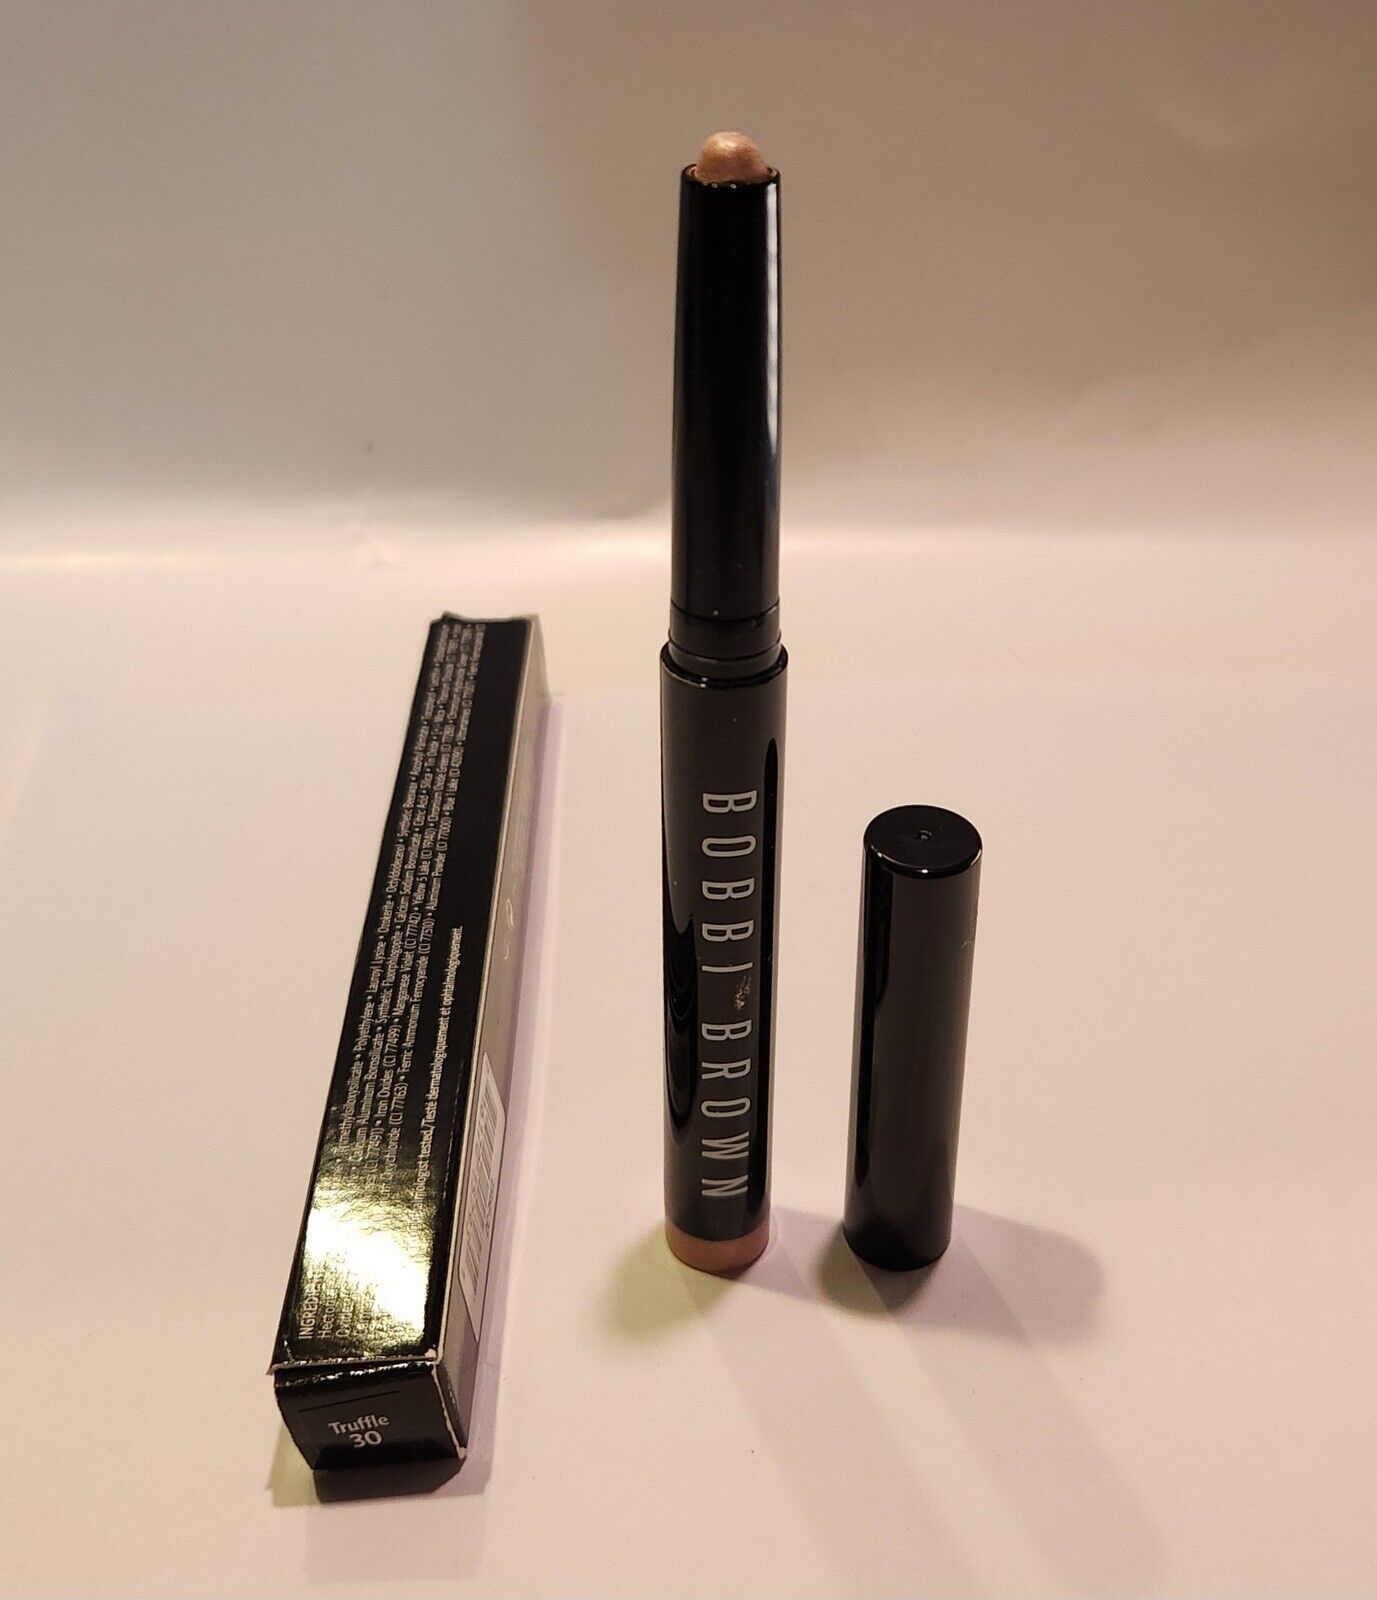 Primary image for Bobbi Brown Long-Wear Cream Shadow Stick, Shade: Truffle 30